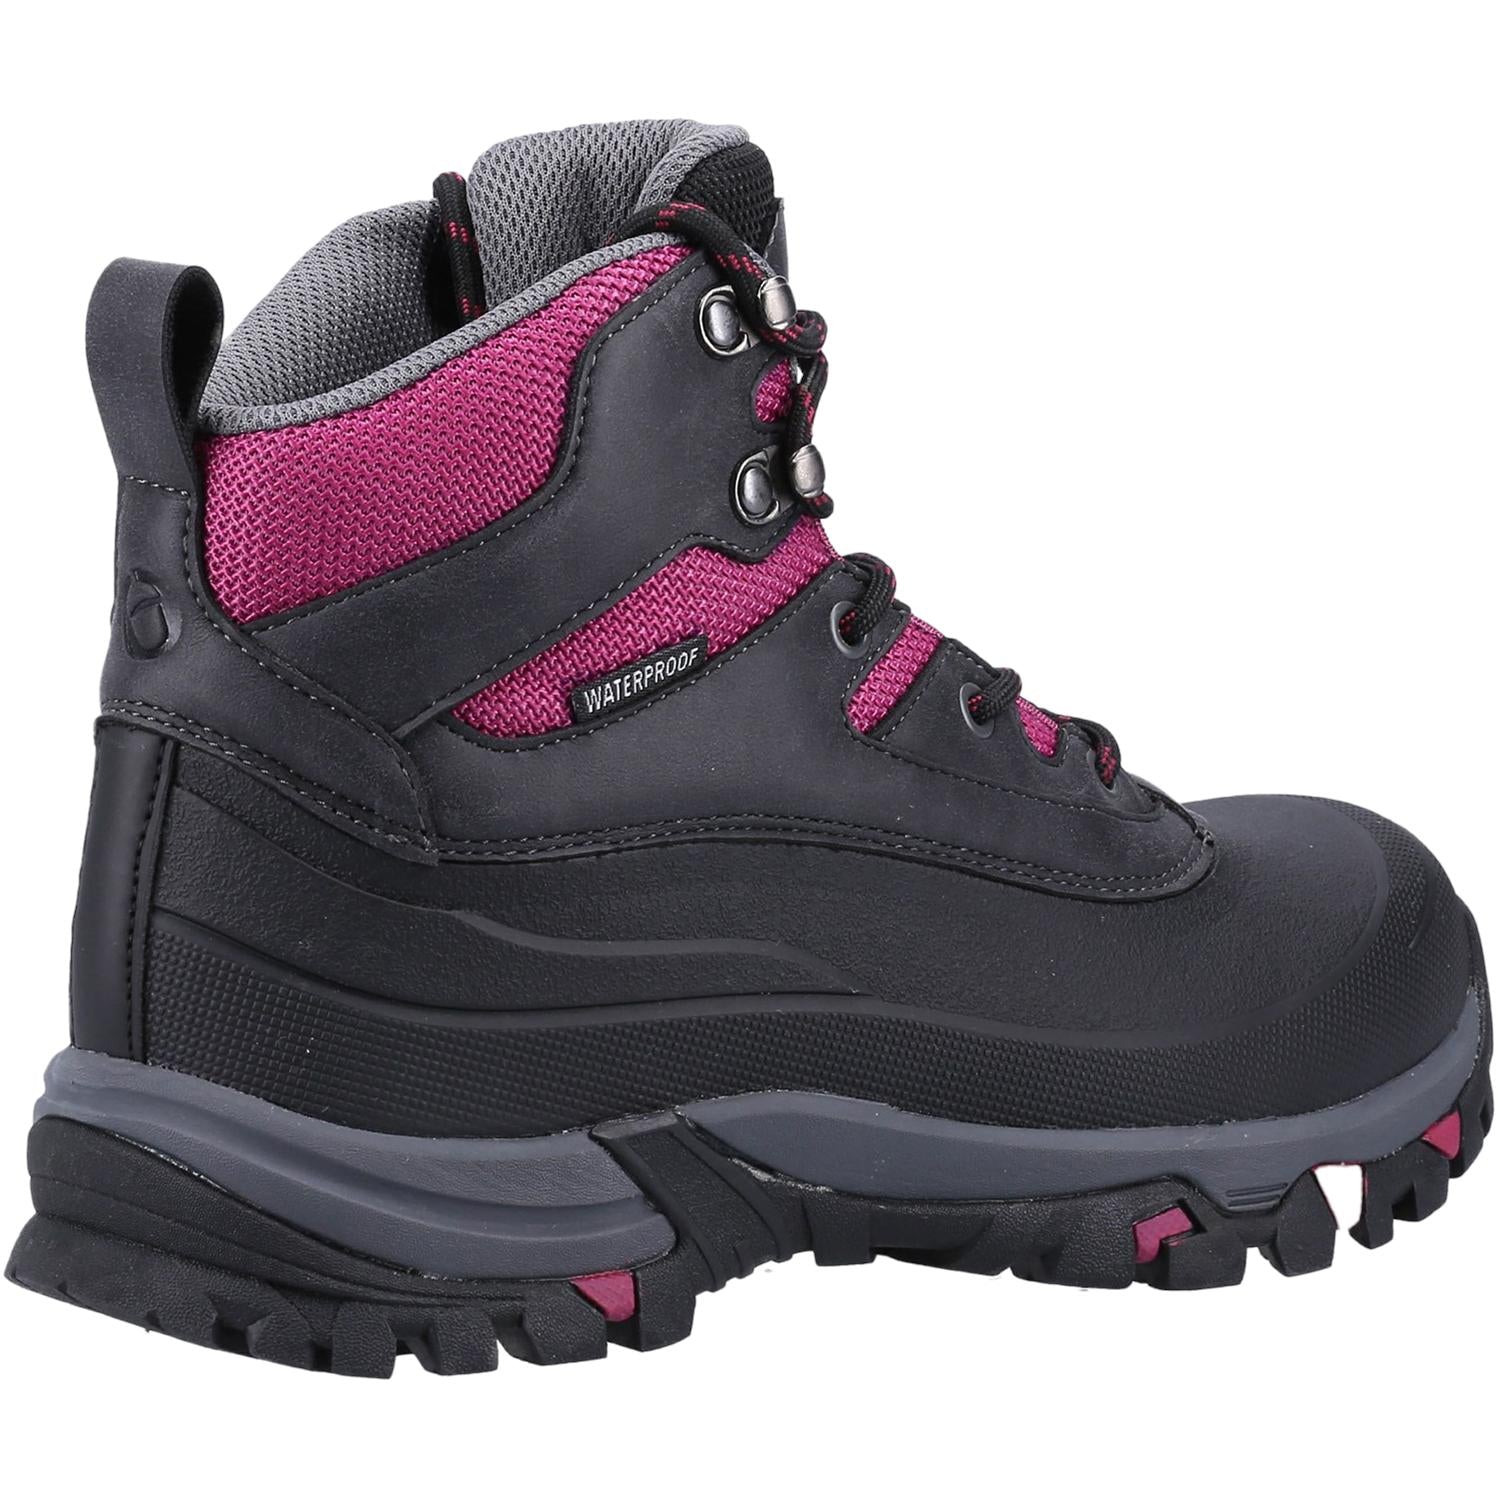 Cotswold Calmsden Hiking Boots